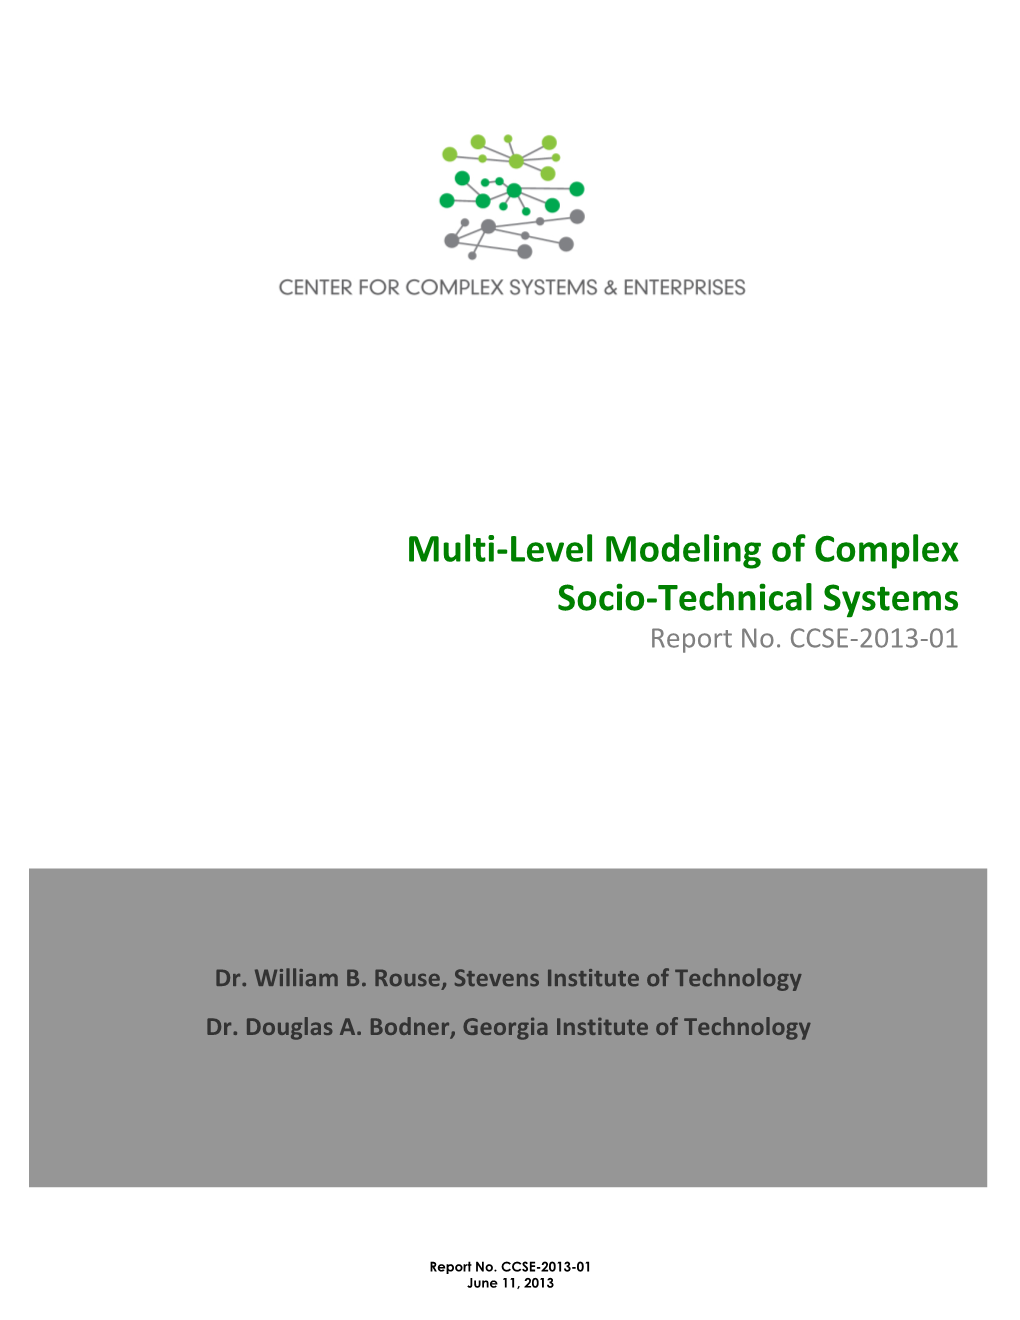 Multi-Level Modeling of Complex Socio-Technical Systems Report No